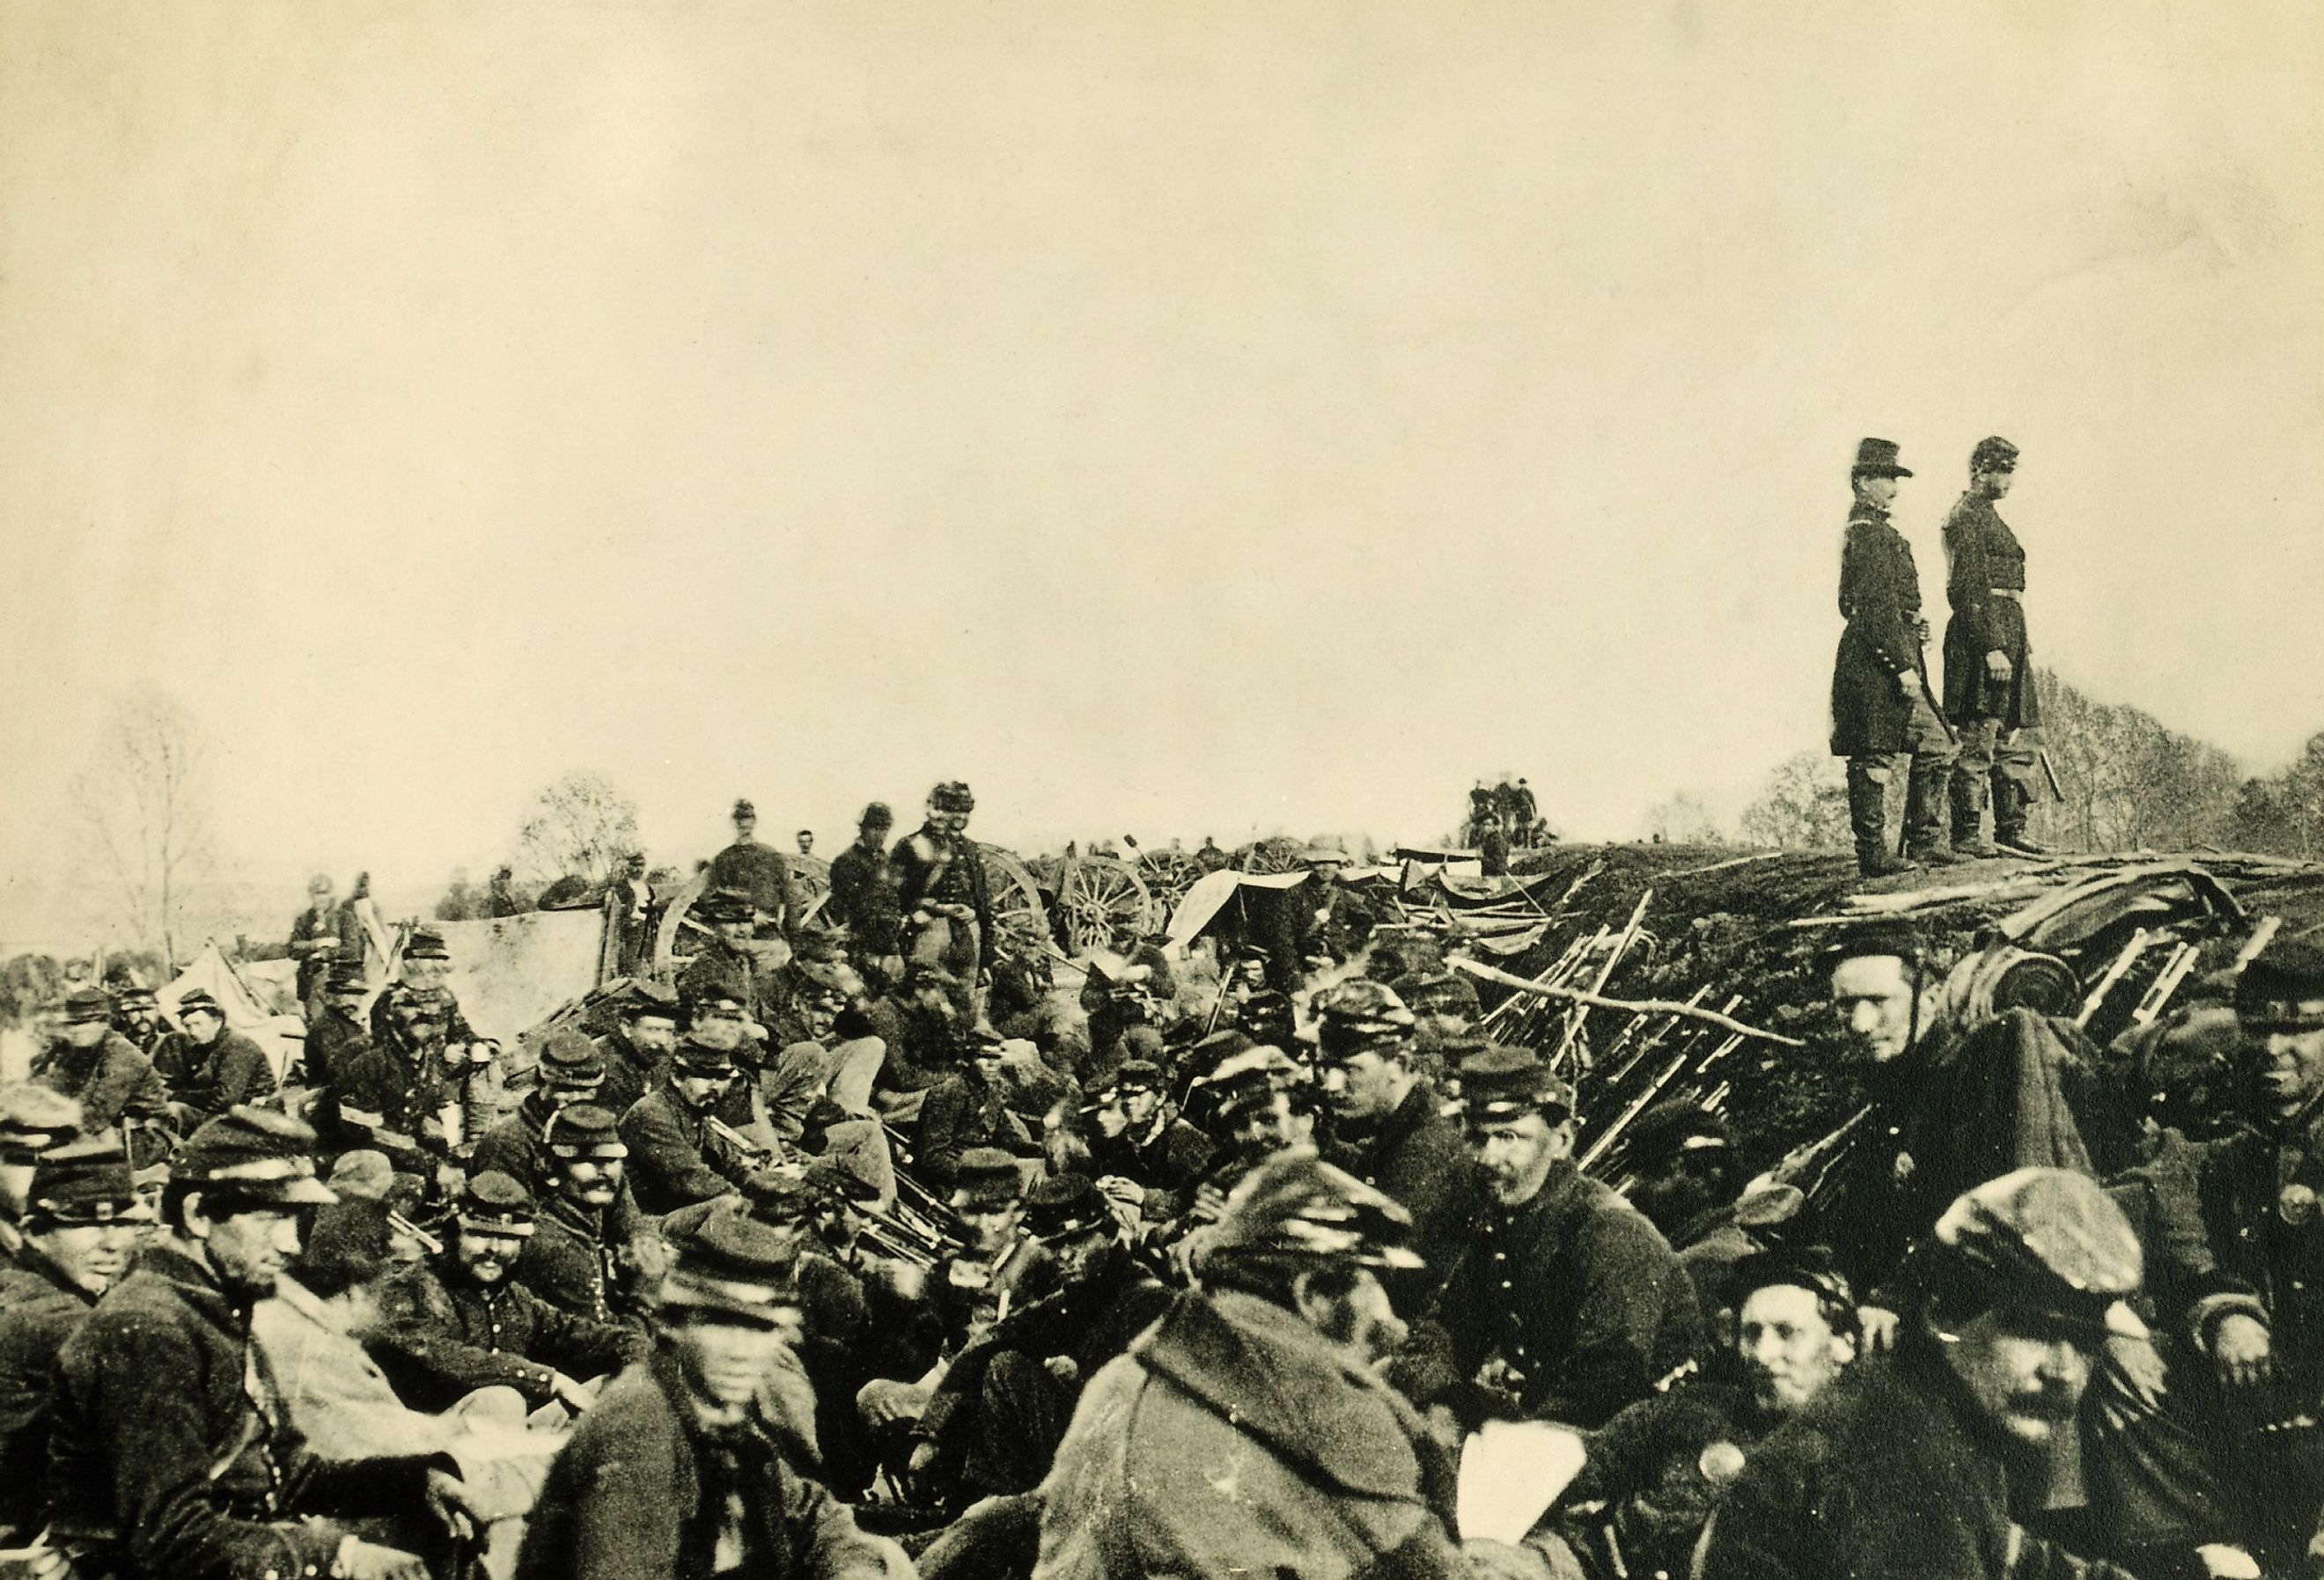 The Civil War, Union soldiers in Trenches before the Battle of Petersburg, Virginia, June 9, 1864.